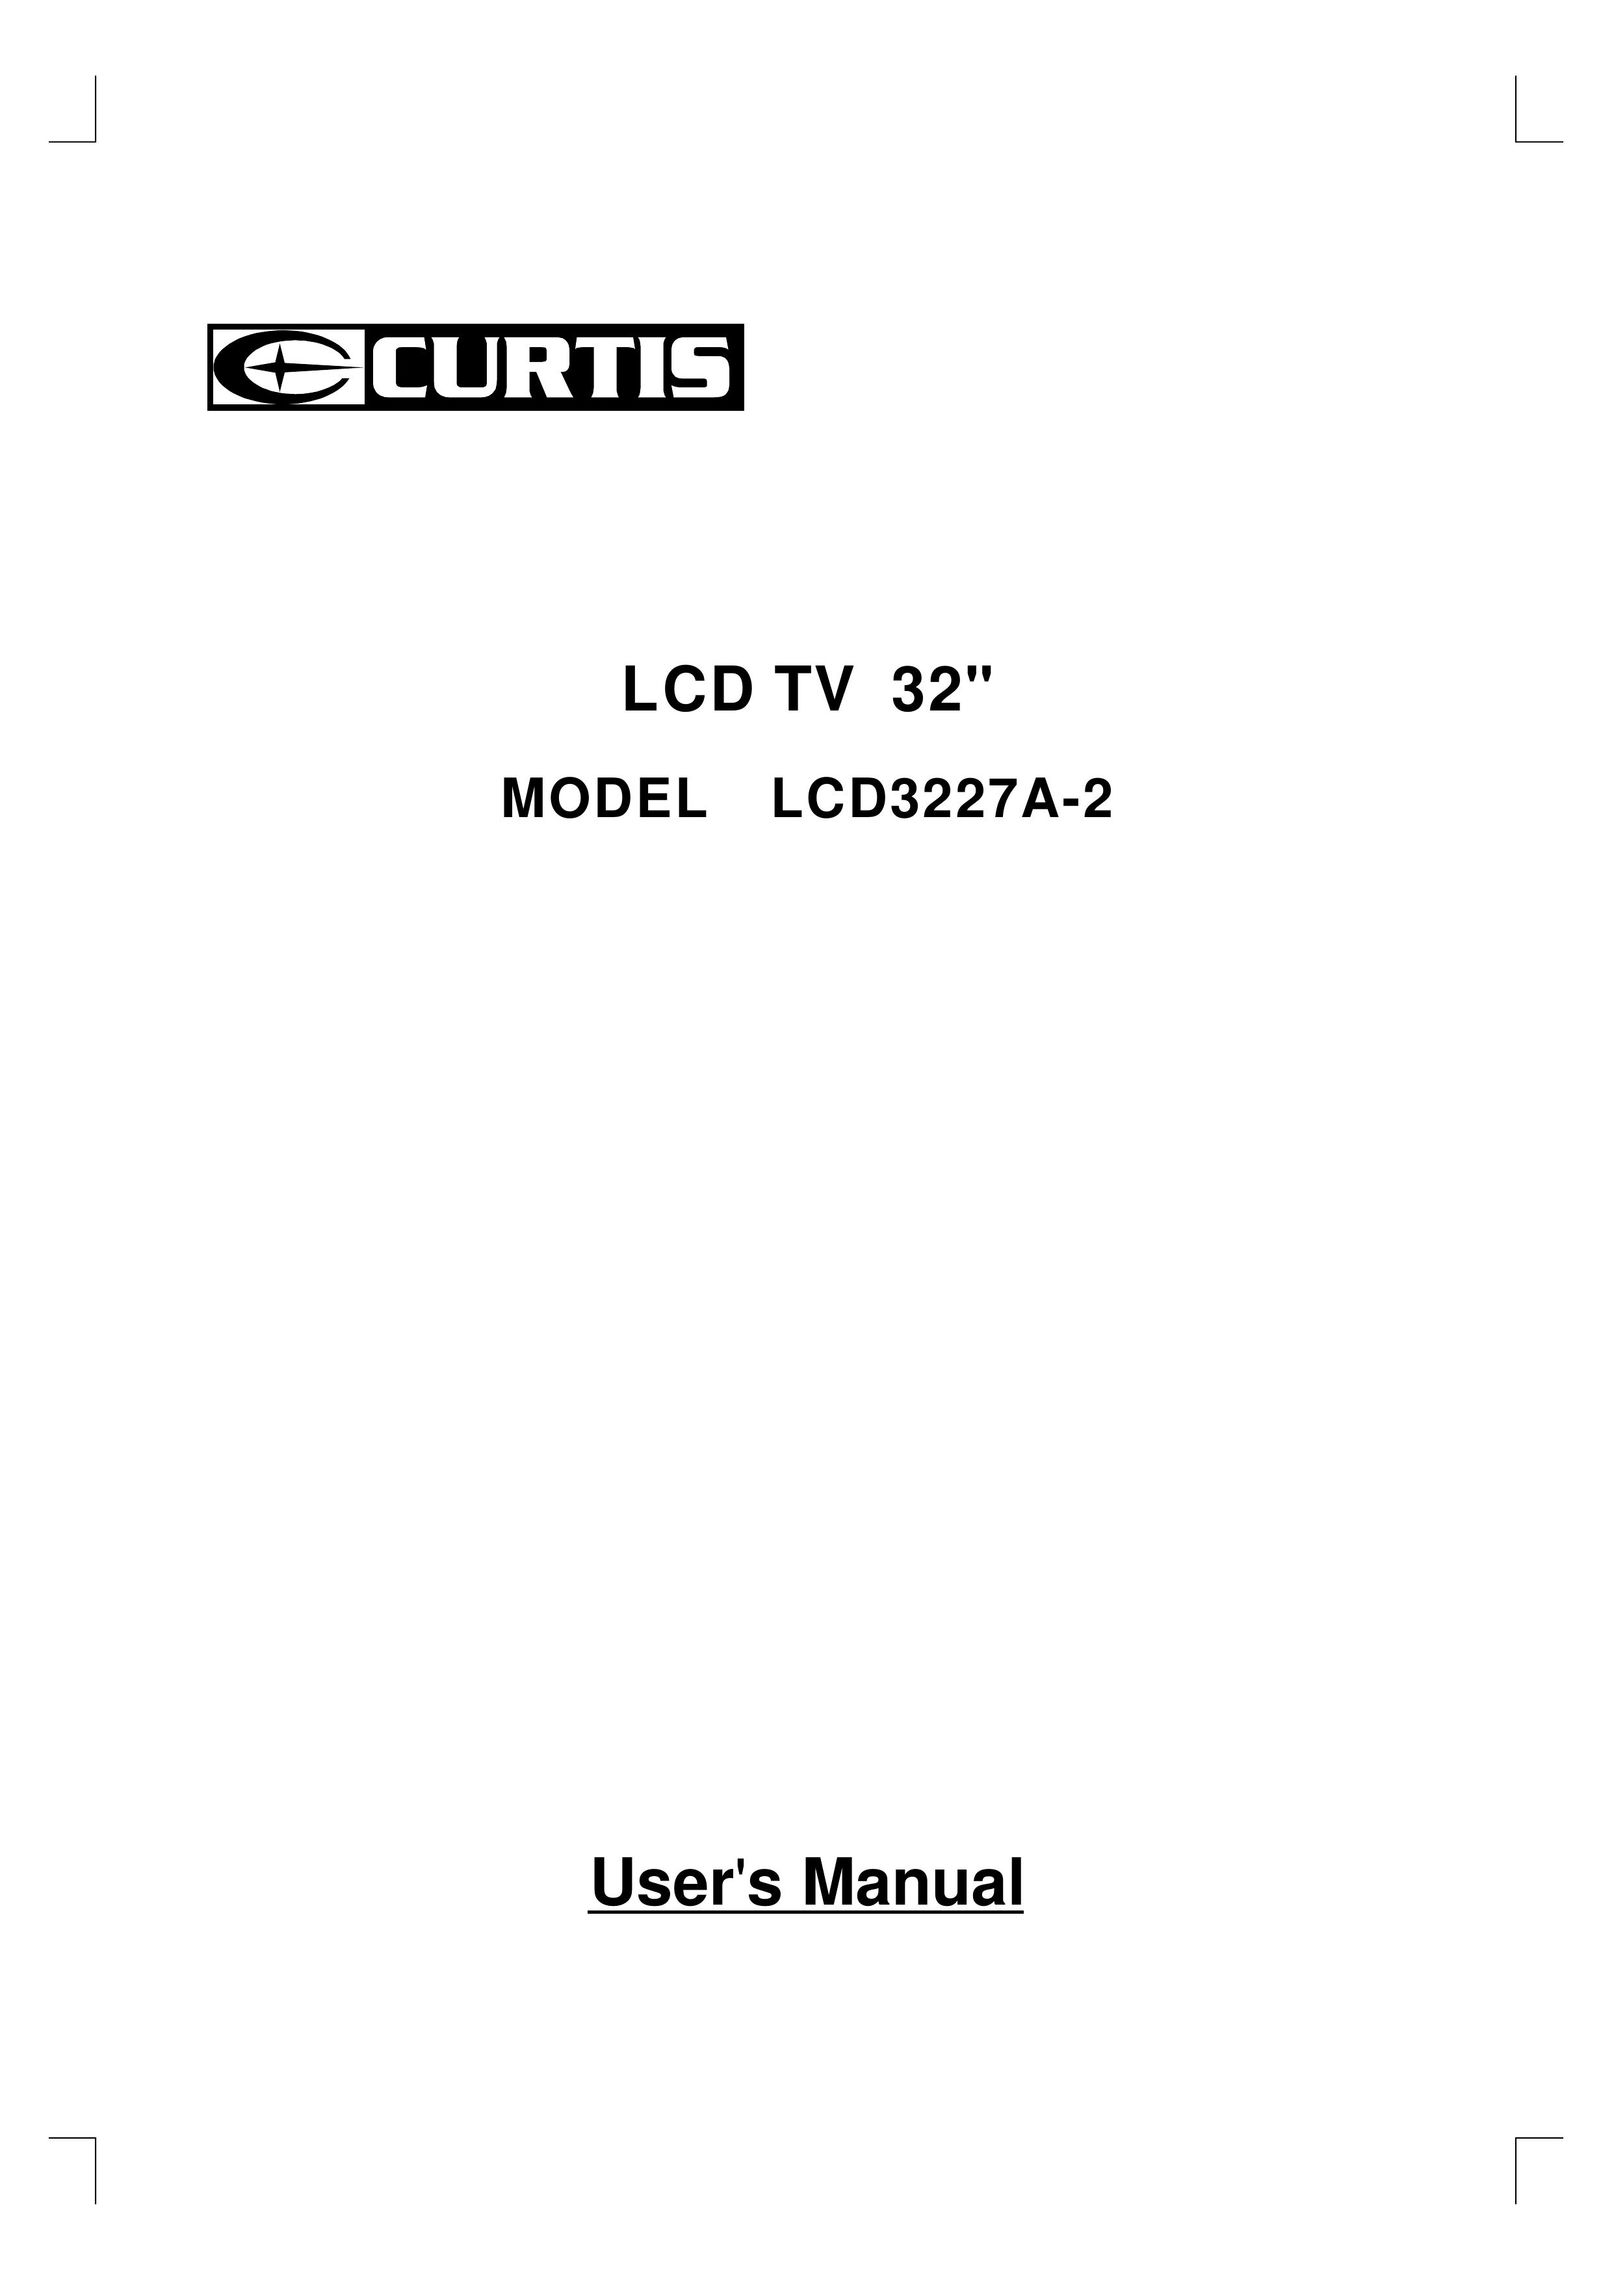 Curtis LCD3227A-2 Flat Panel Television User Manual